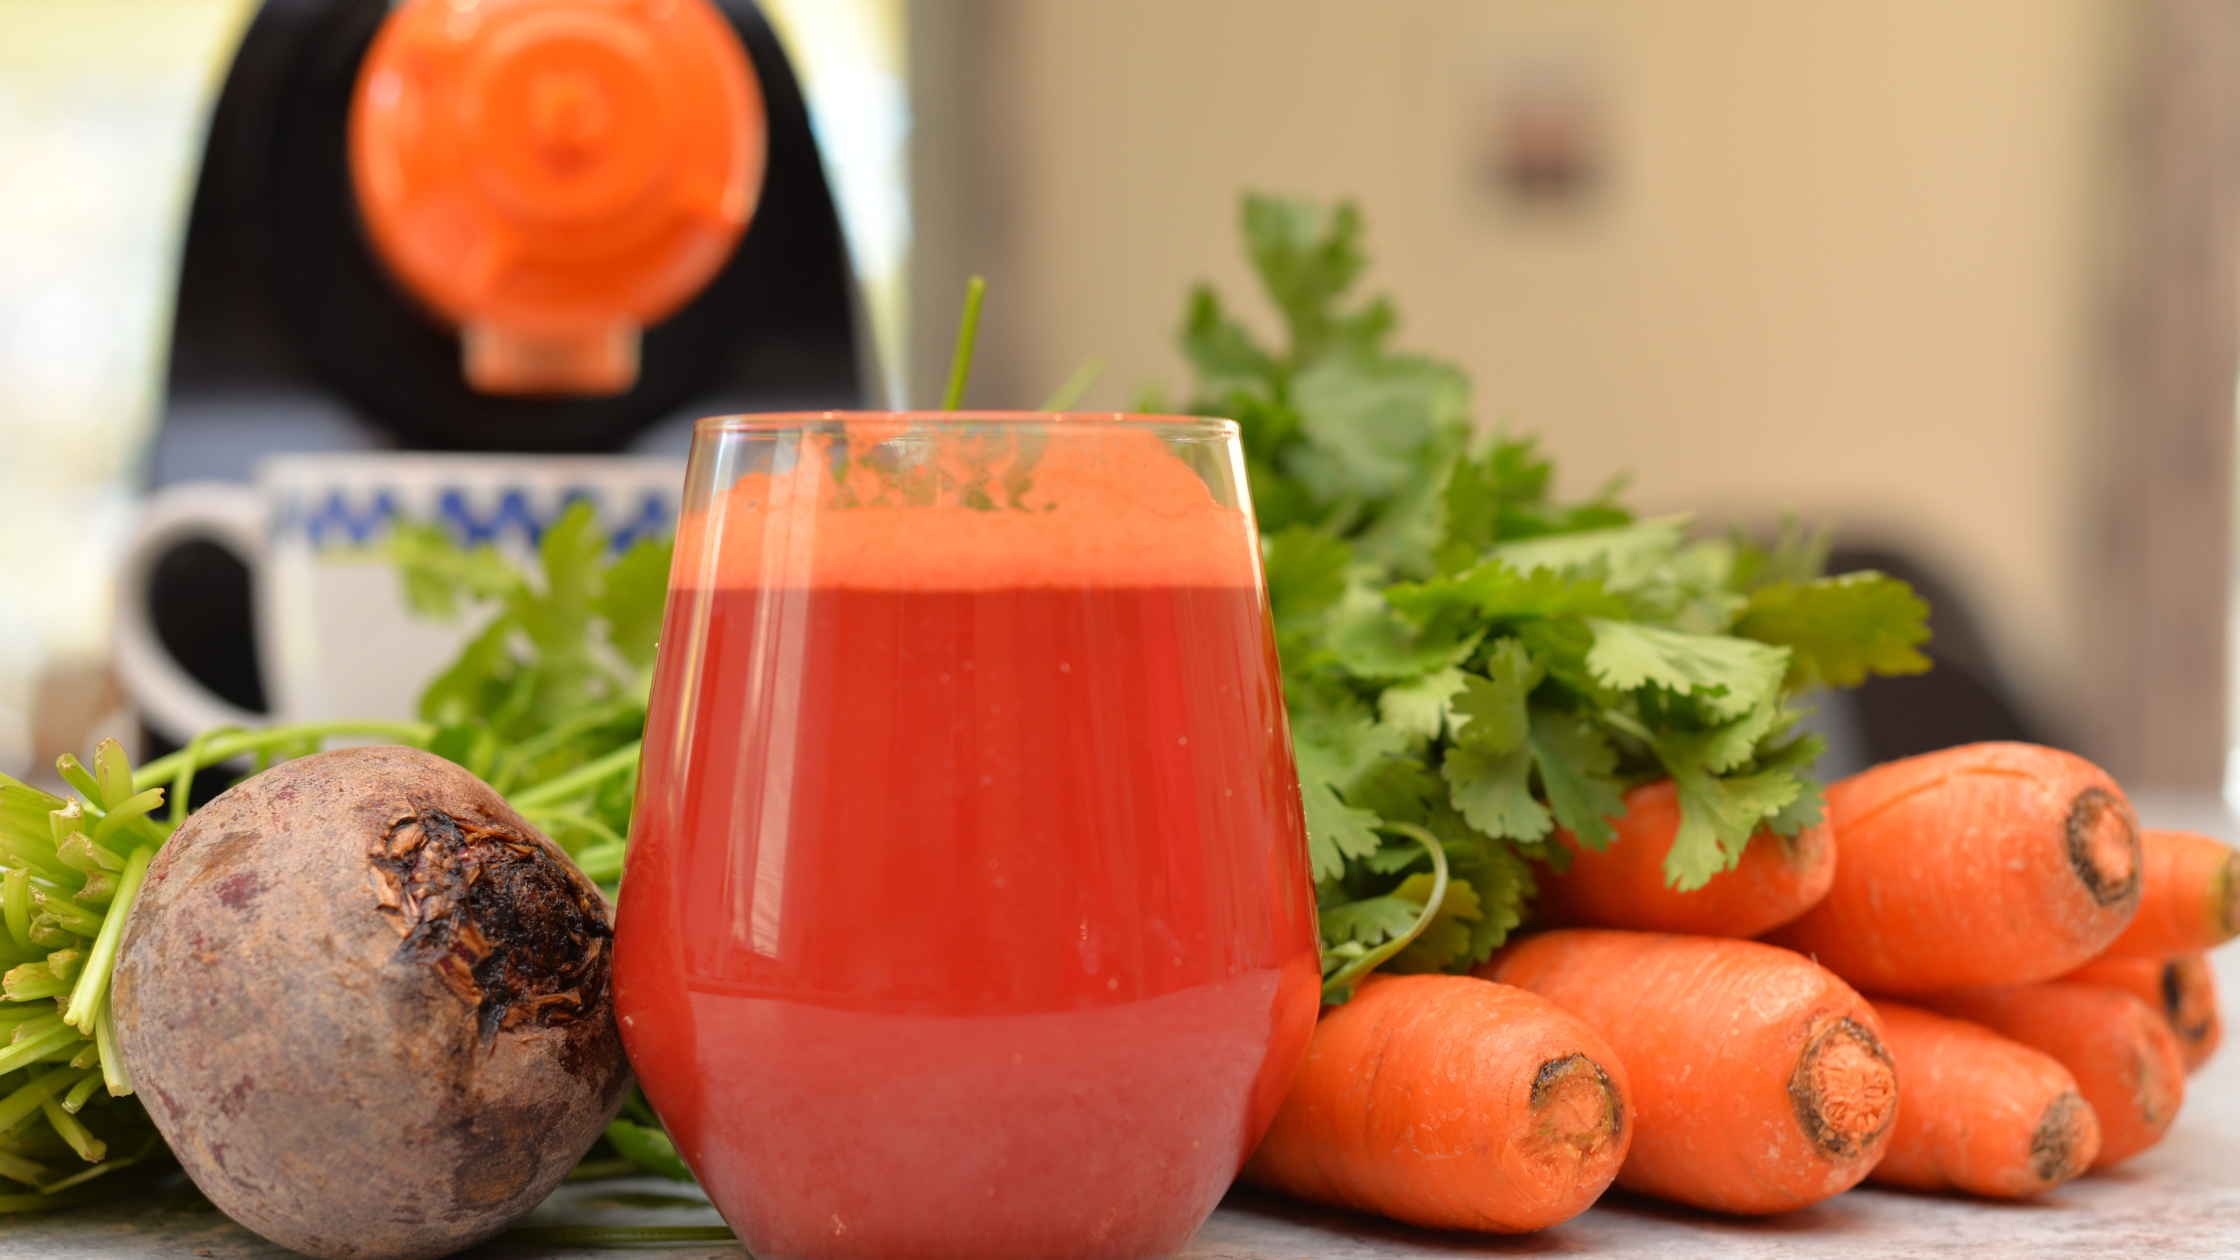 Juicing for High Blood Pressure: A Natural Way to Manage Hypertension